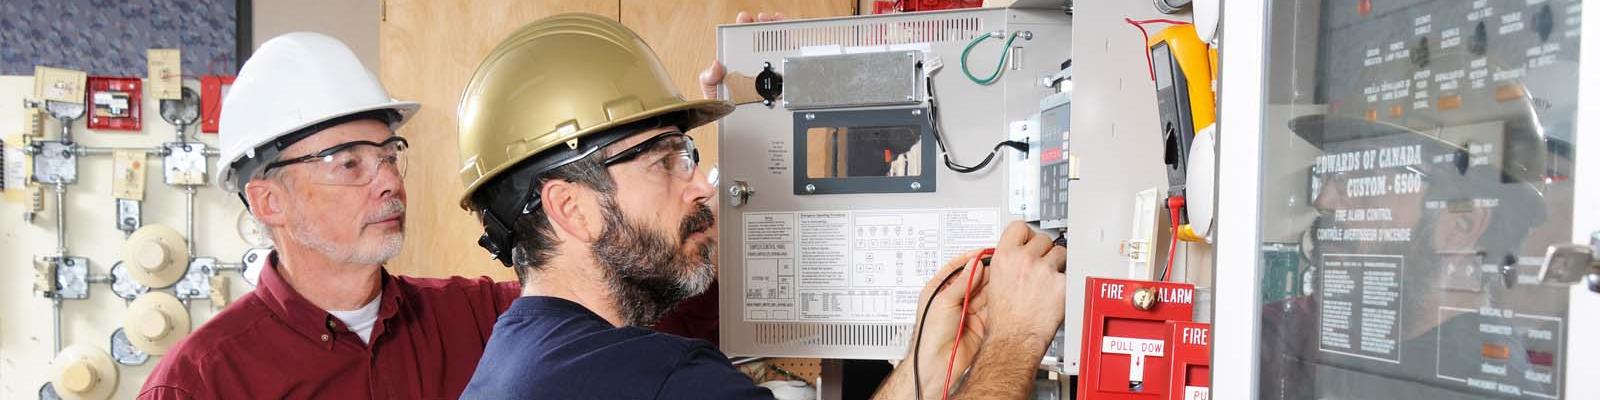 Apprentice electrician being mentored by a journeyman electrician 